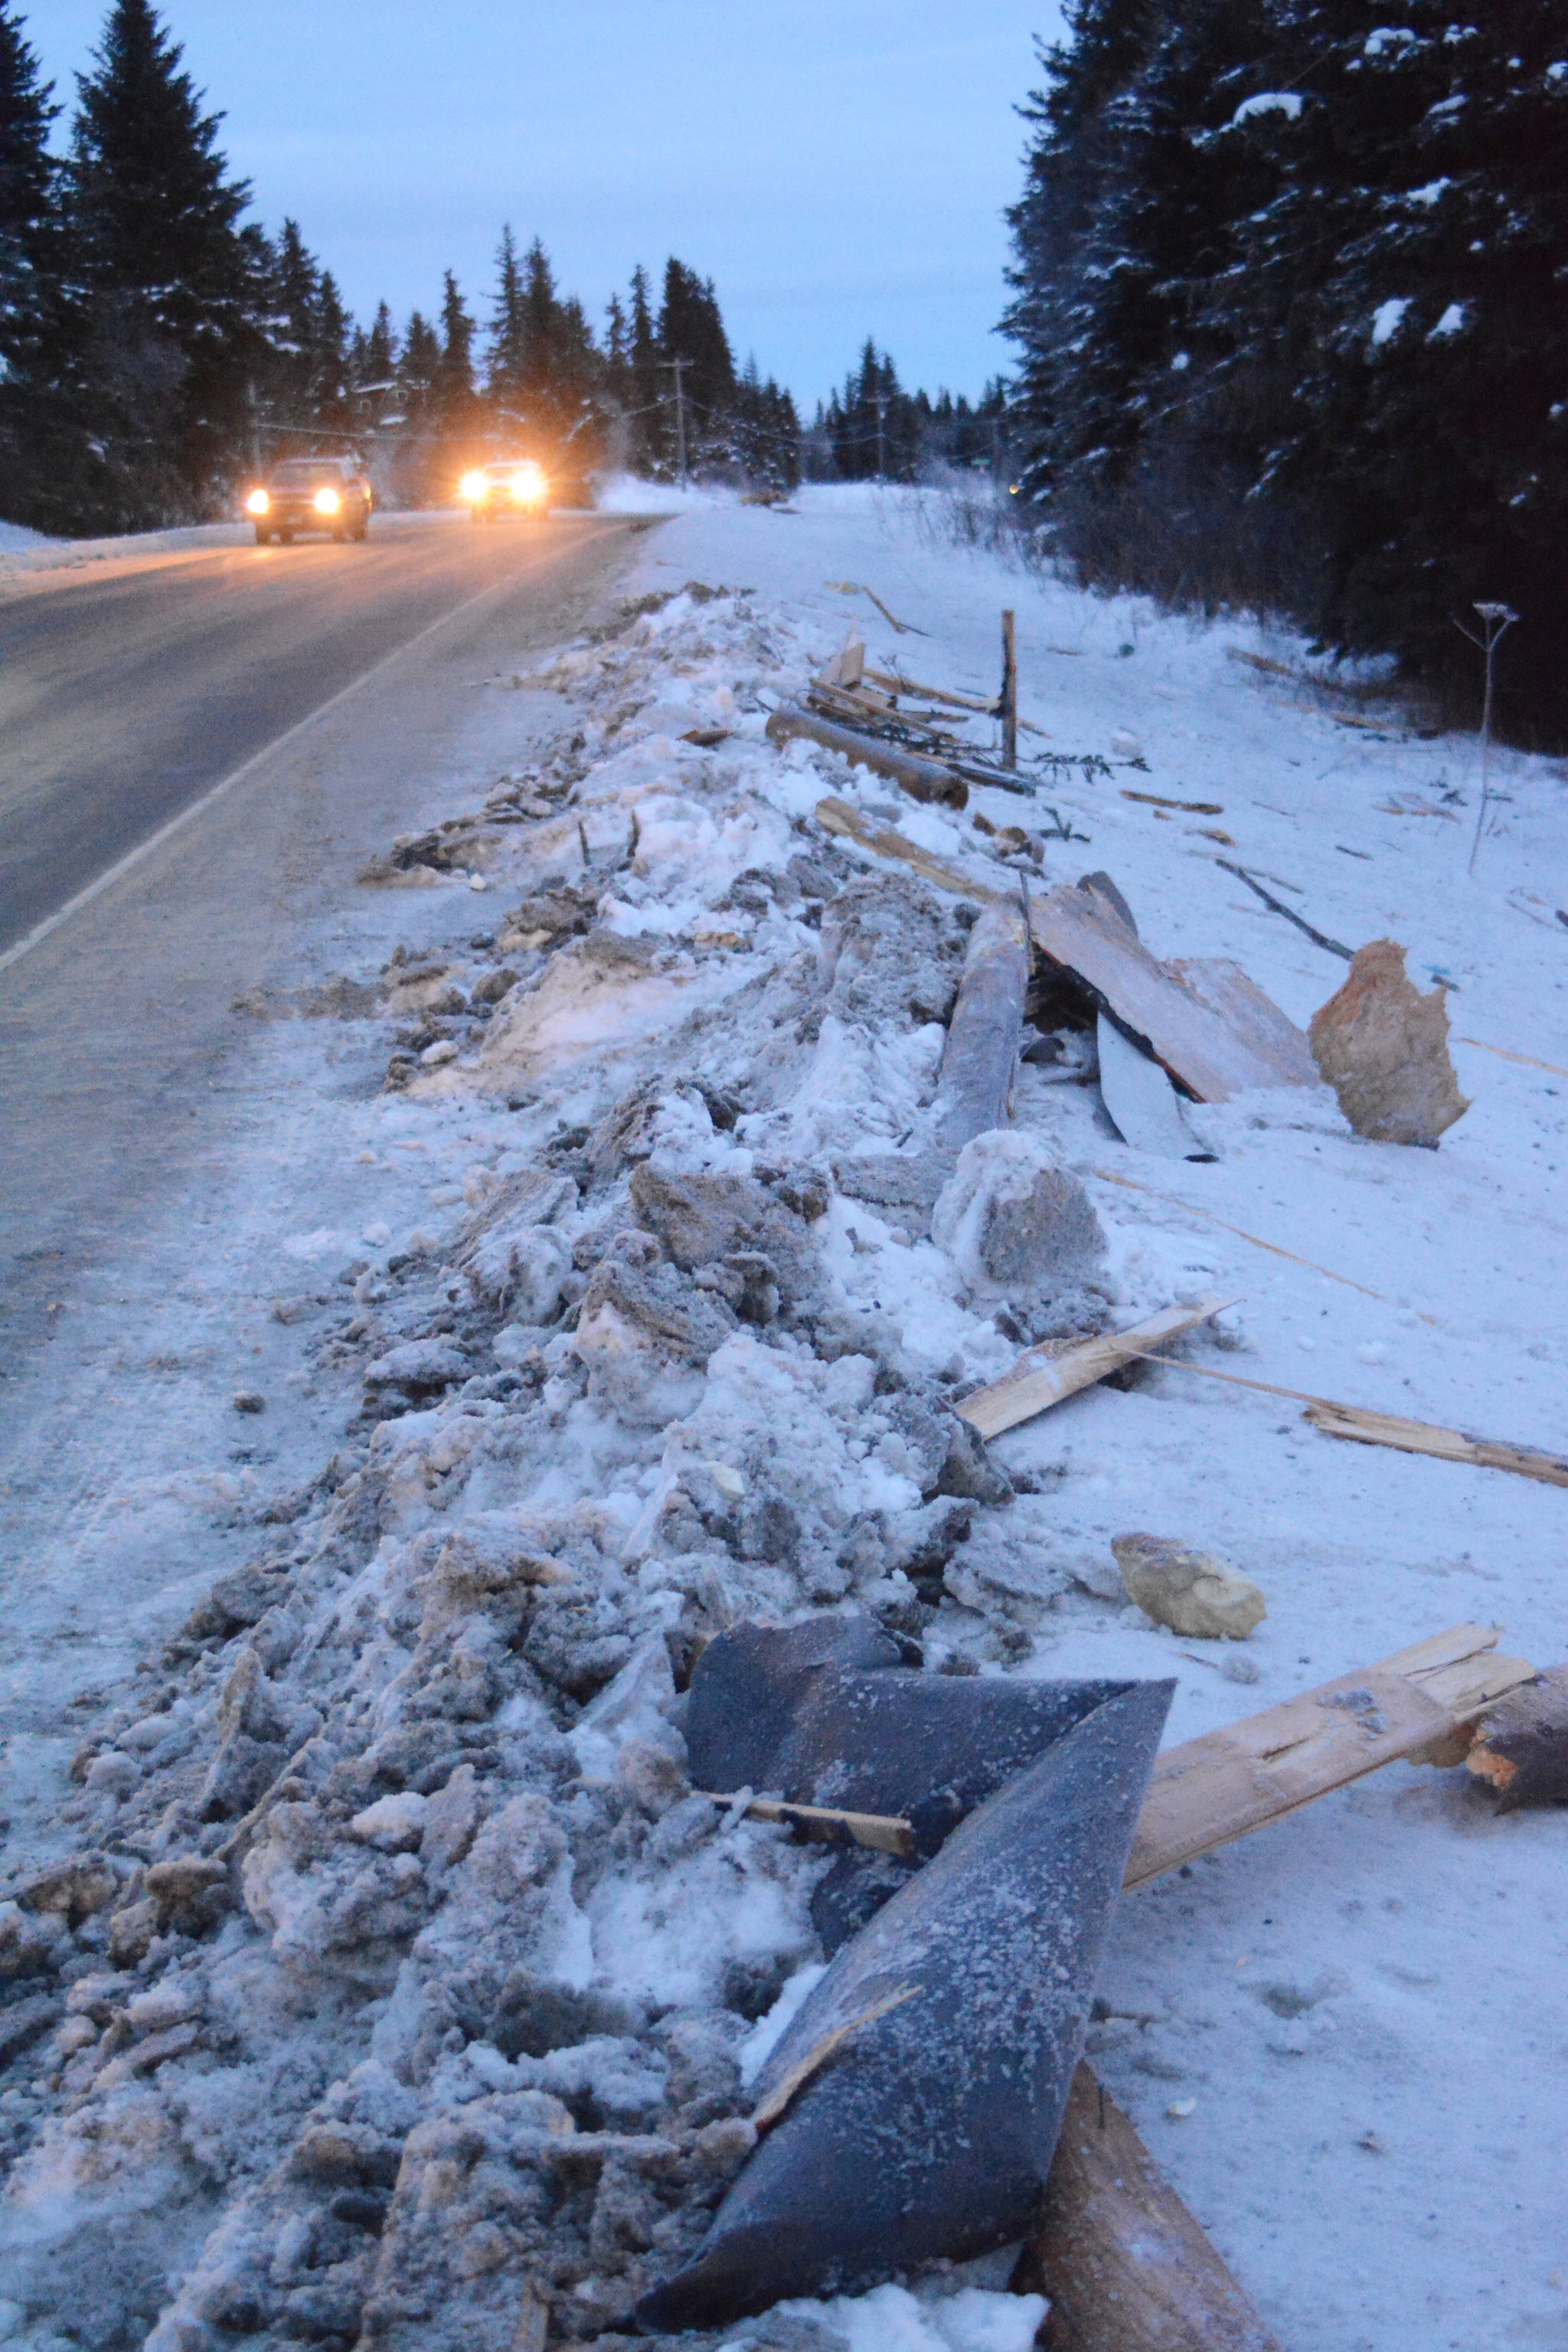 Debris from an exploded house lines the road near Mile 166 Sterling Highway on Friday, Dec. 28, 2018, near Homer, Alaska. The debris field from the explosion spread at least 200 feet in all directions. (Photo by Michael Armstrong/Homer News).